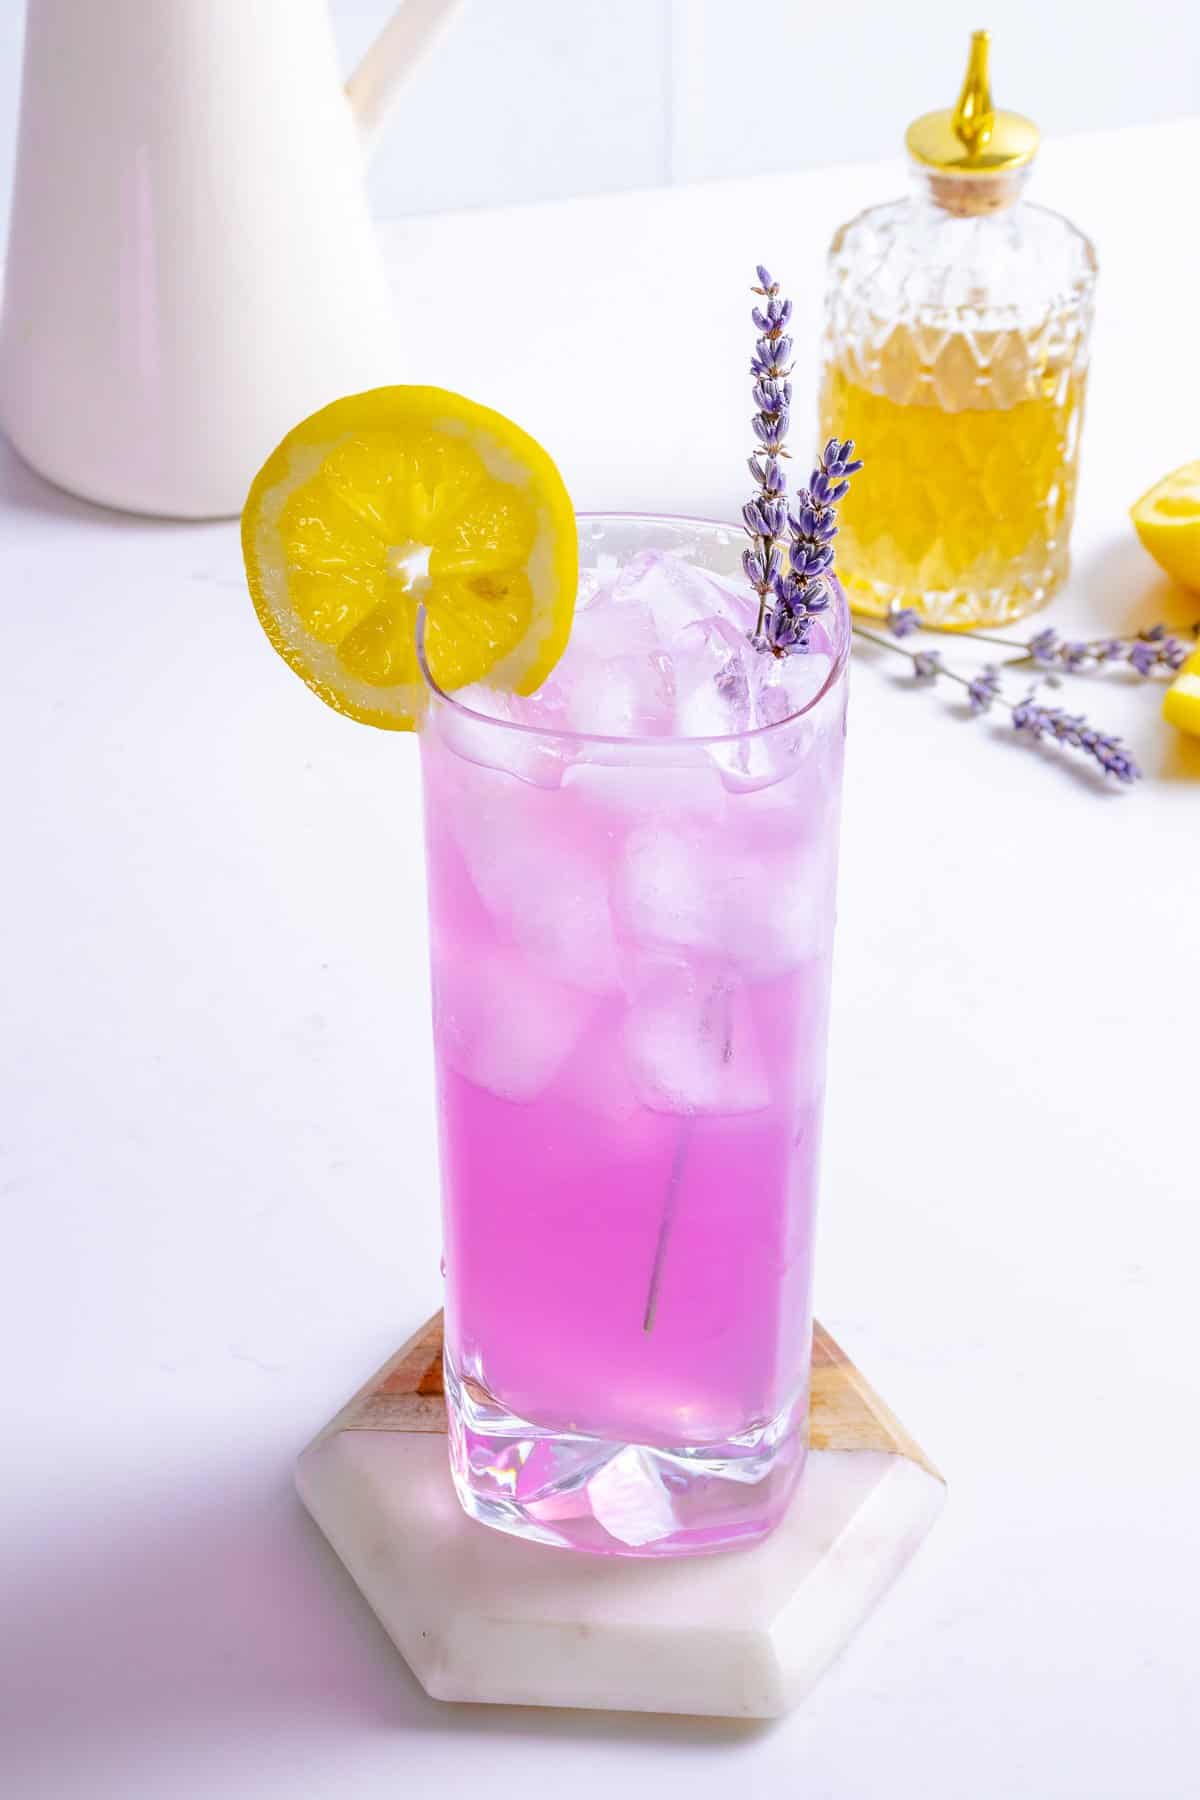 Lavender lemonade on table with lemon and flowers.